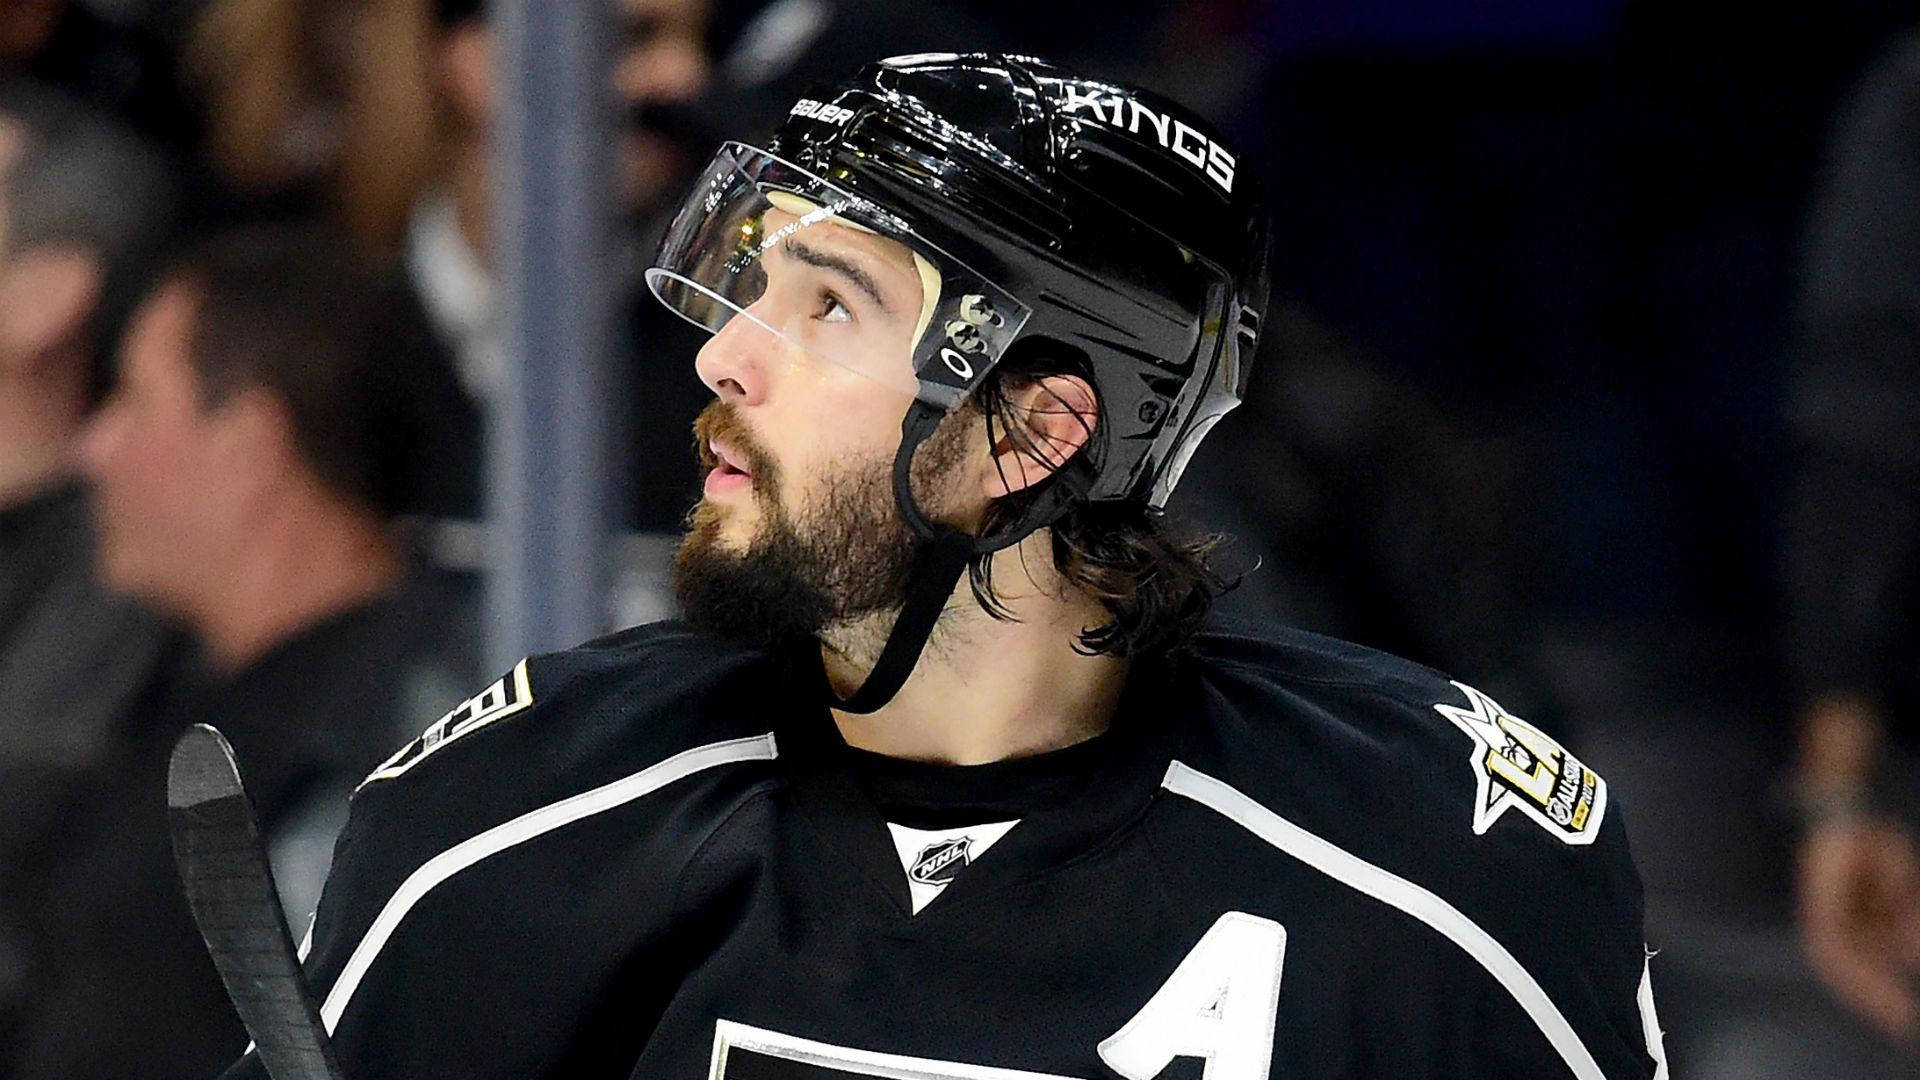 Drew Doughty Looking Upward To The Right During Game Wallpaper